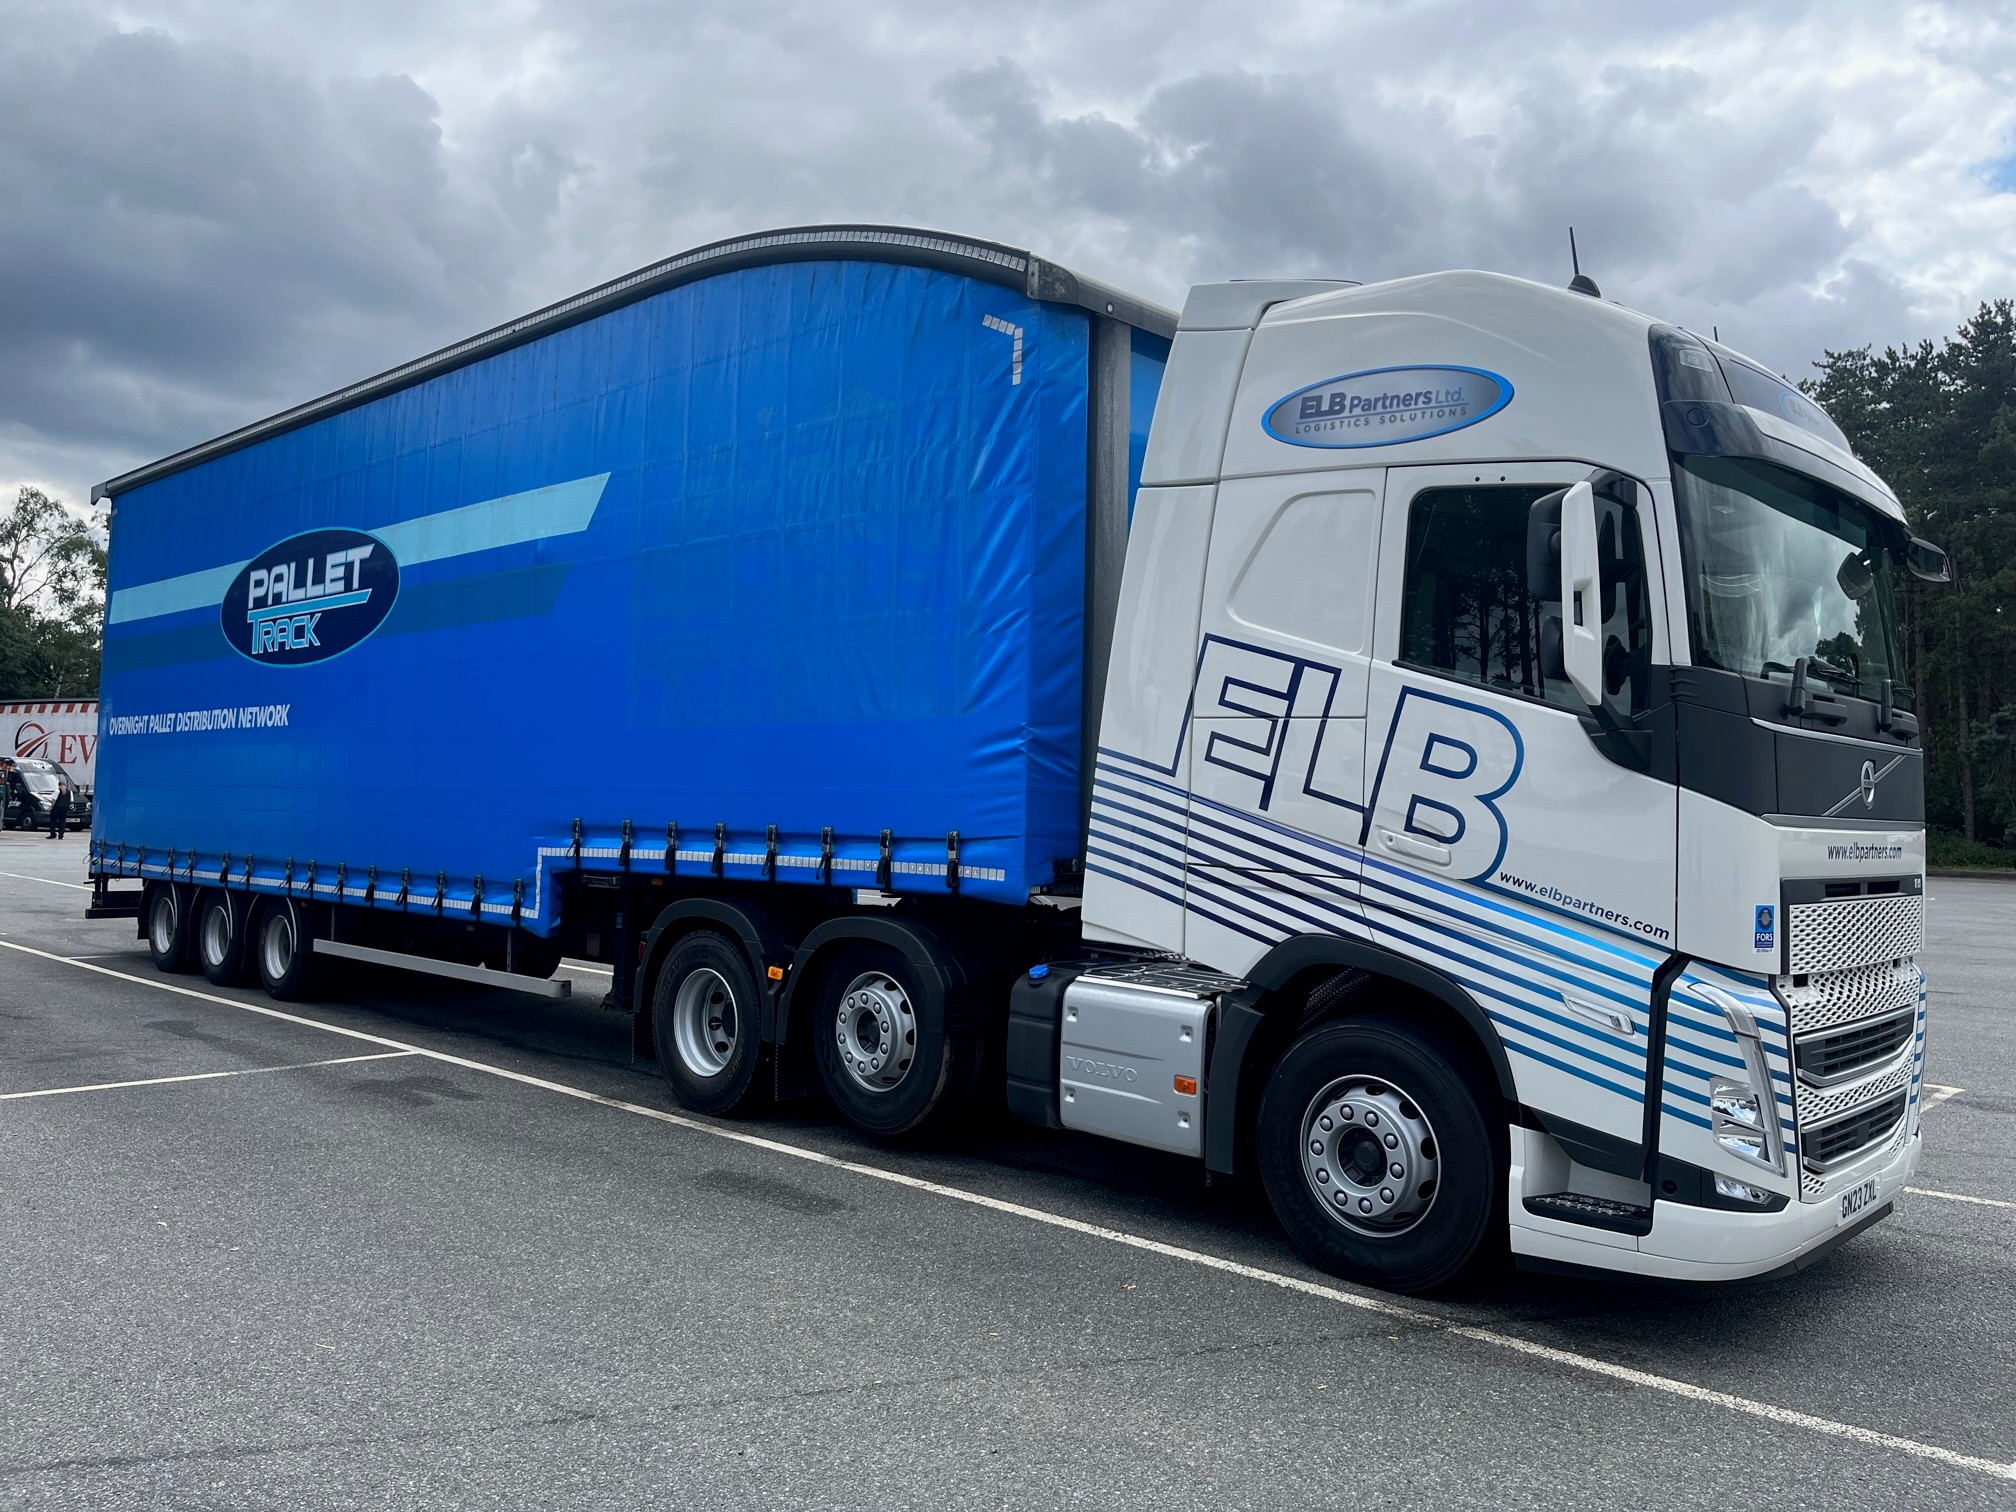 A new ELB Partners' branded cab and trailer